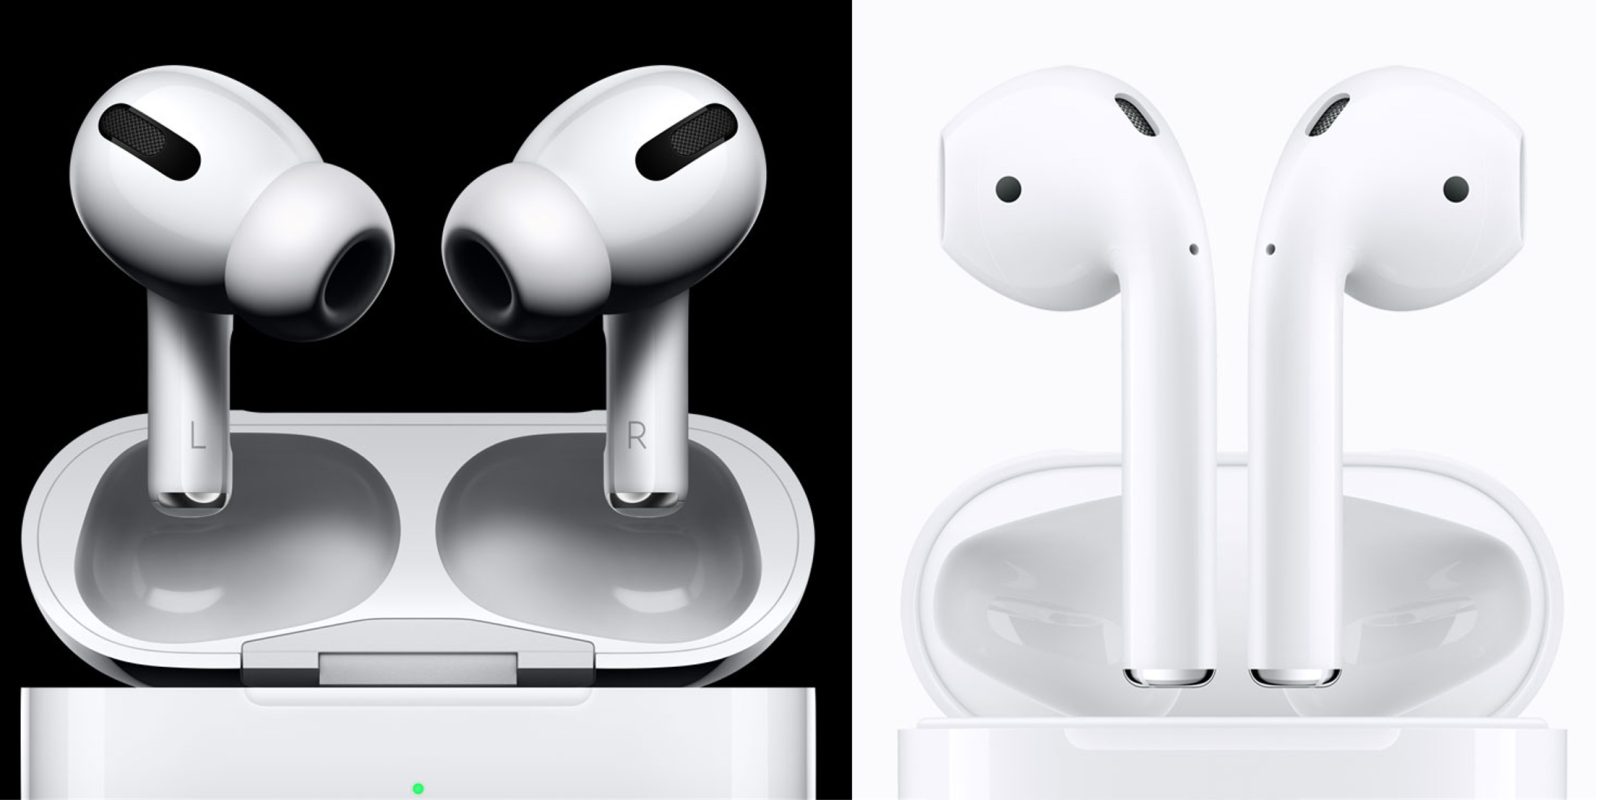 Analyst Estimates Apple Sold 3 Million Airpods Over Black Friday Cyber Monday Weekend 9to5mac